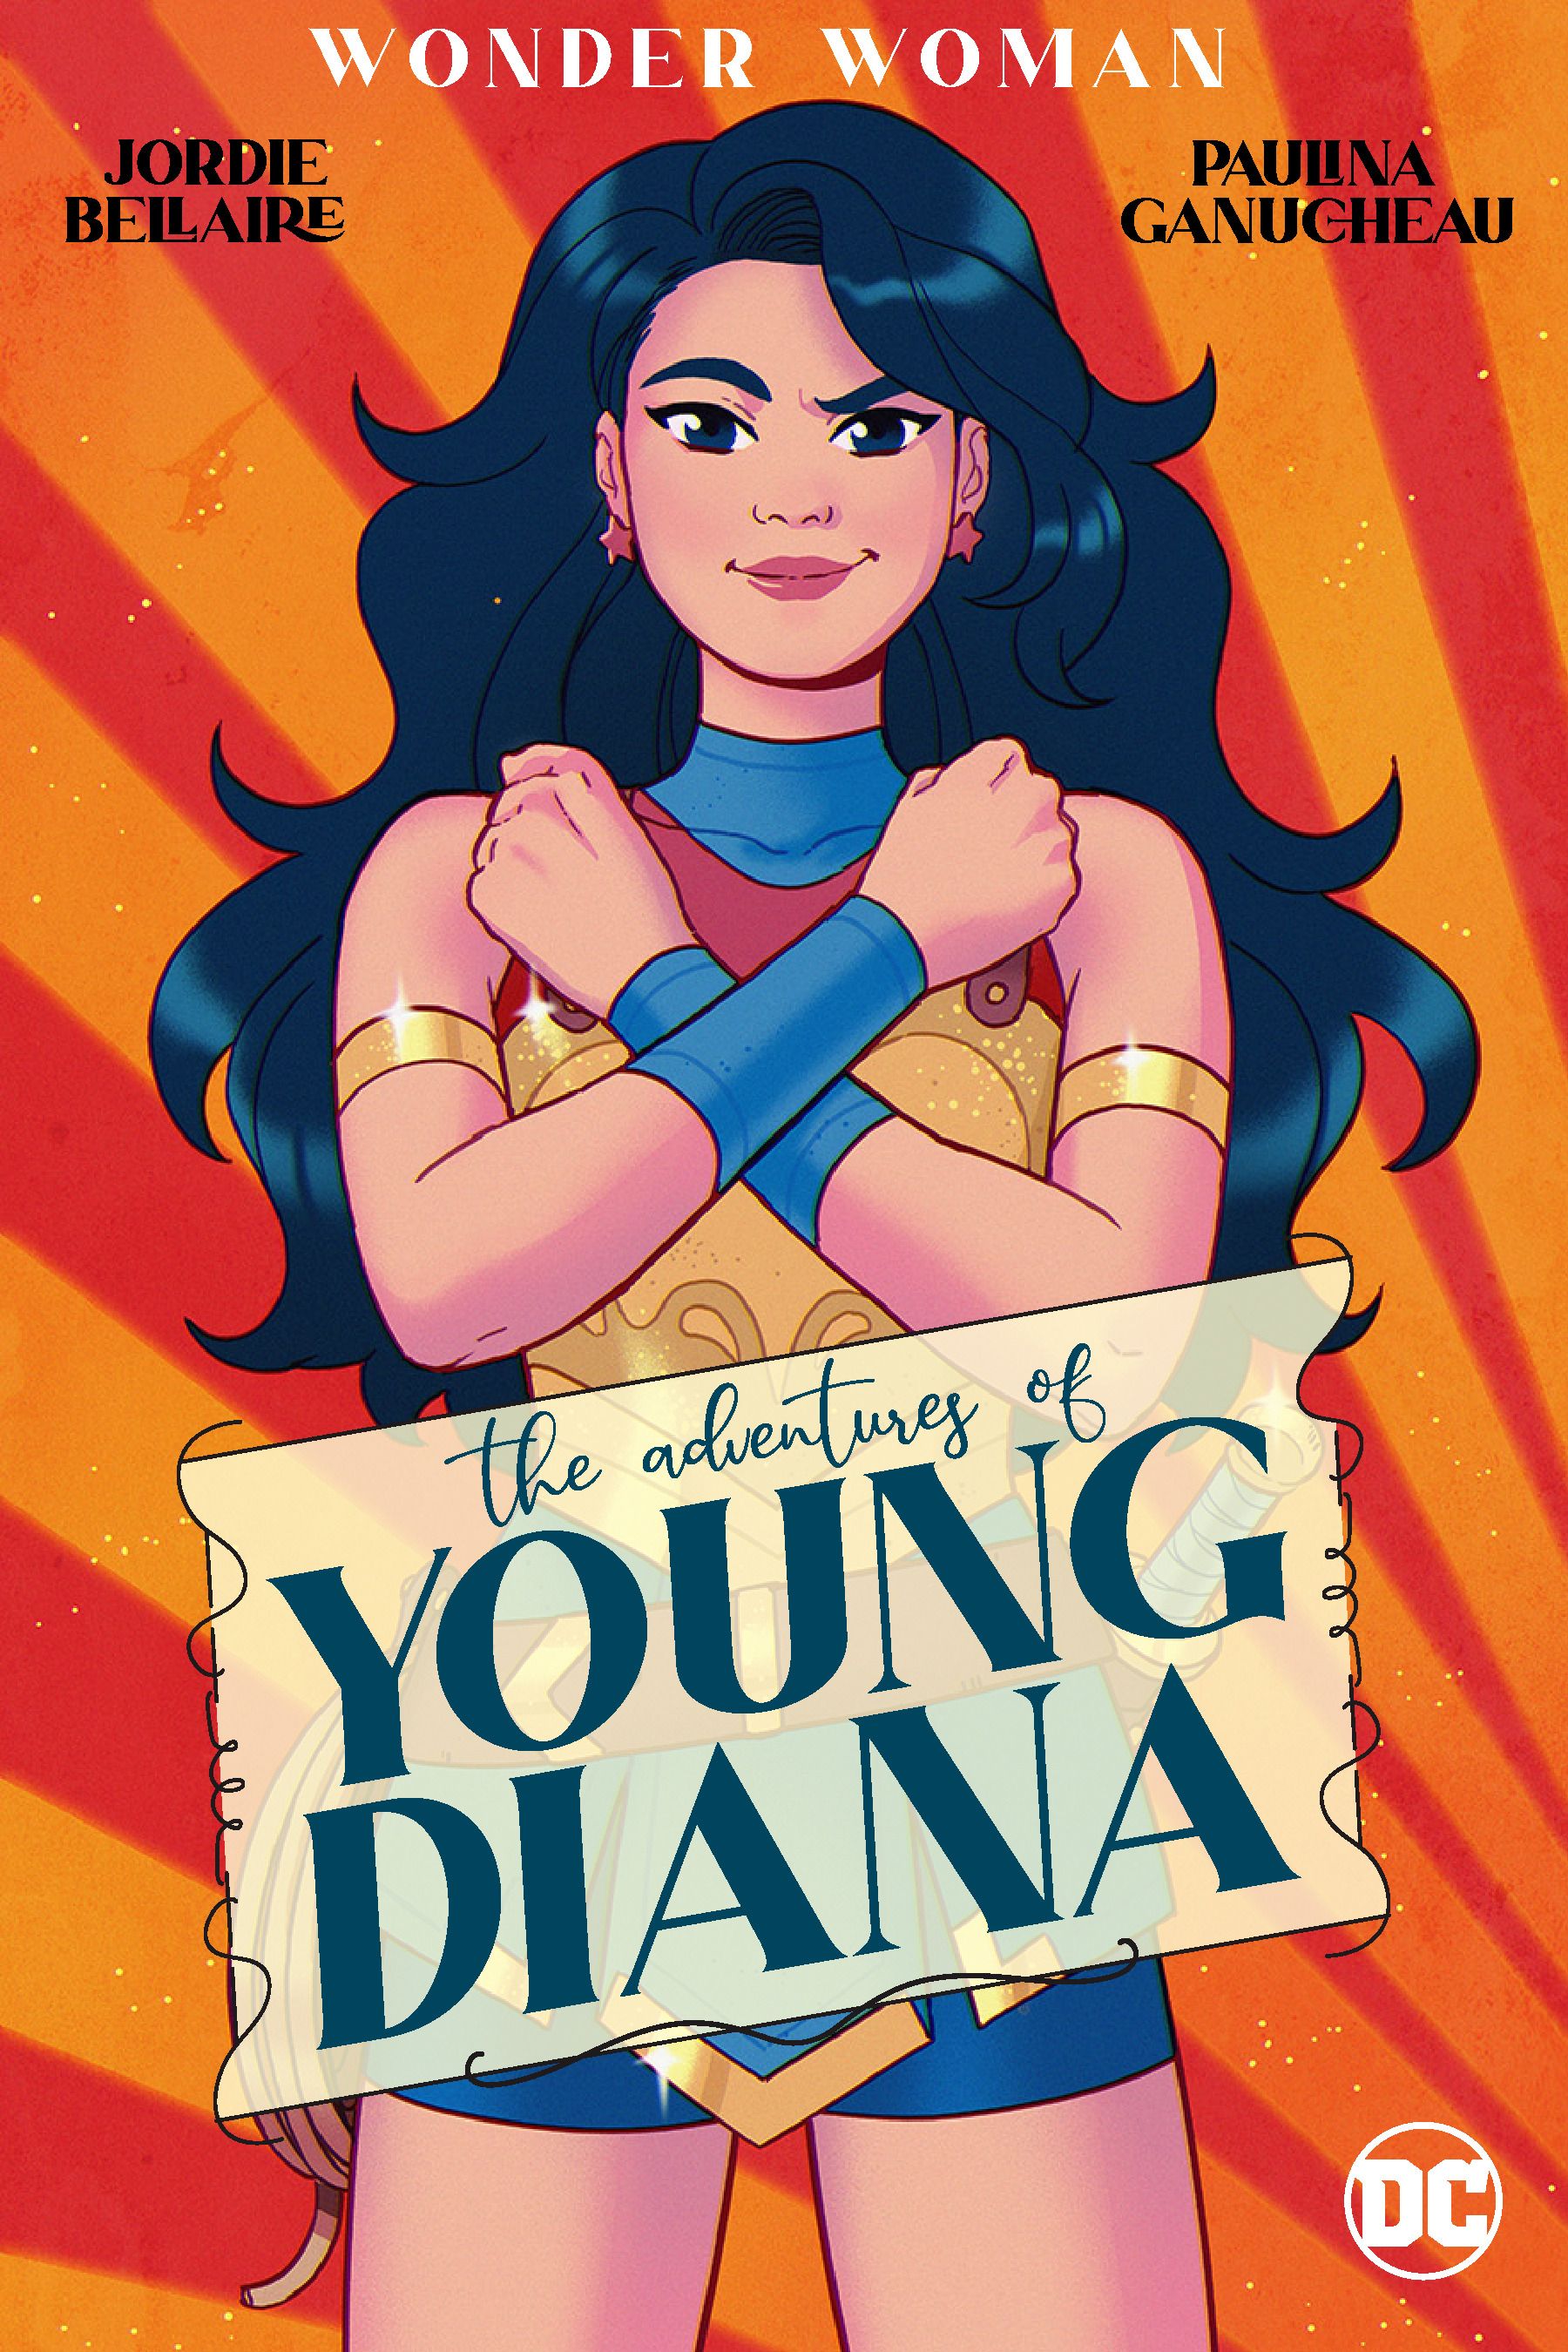 DC Reveals Wonder Woman’s Past and a Timely Blue Beetle Story in New YA Titles